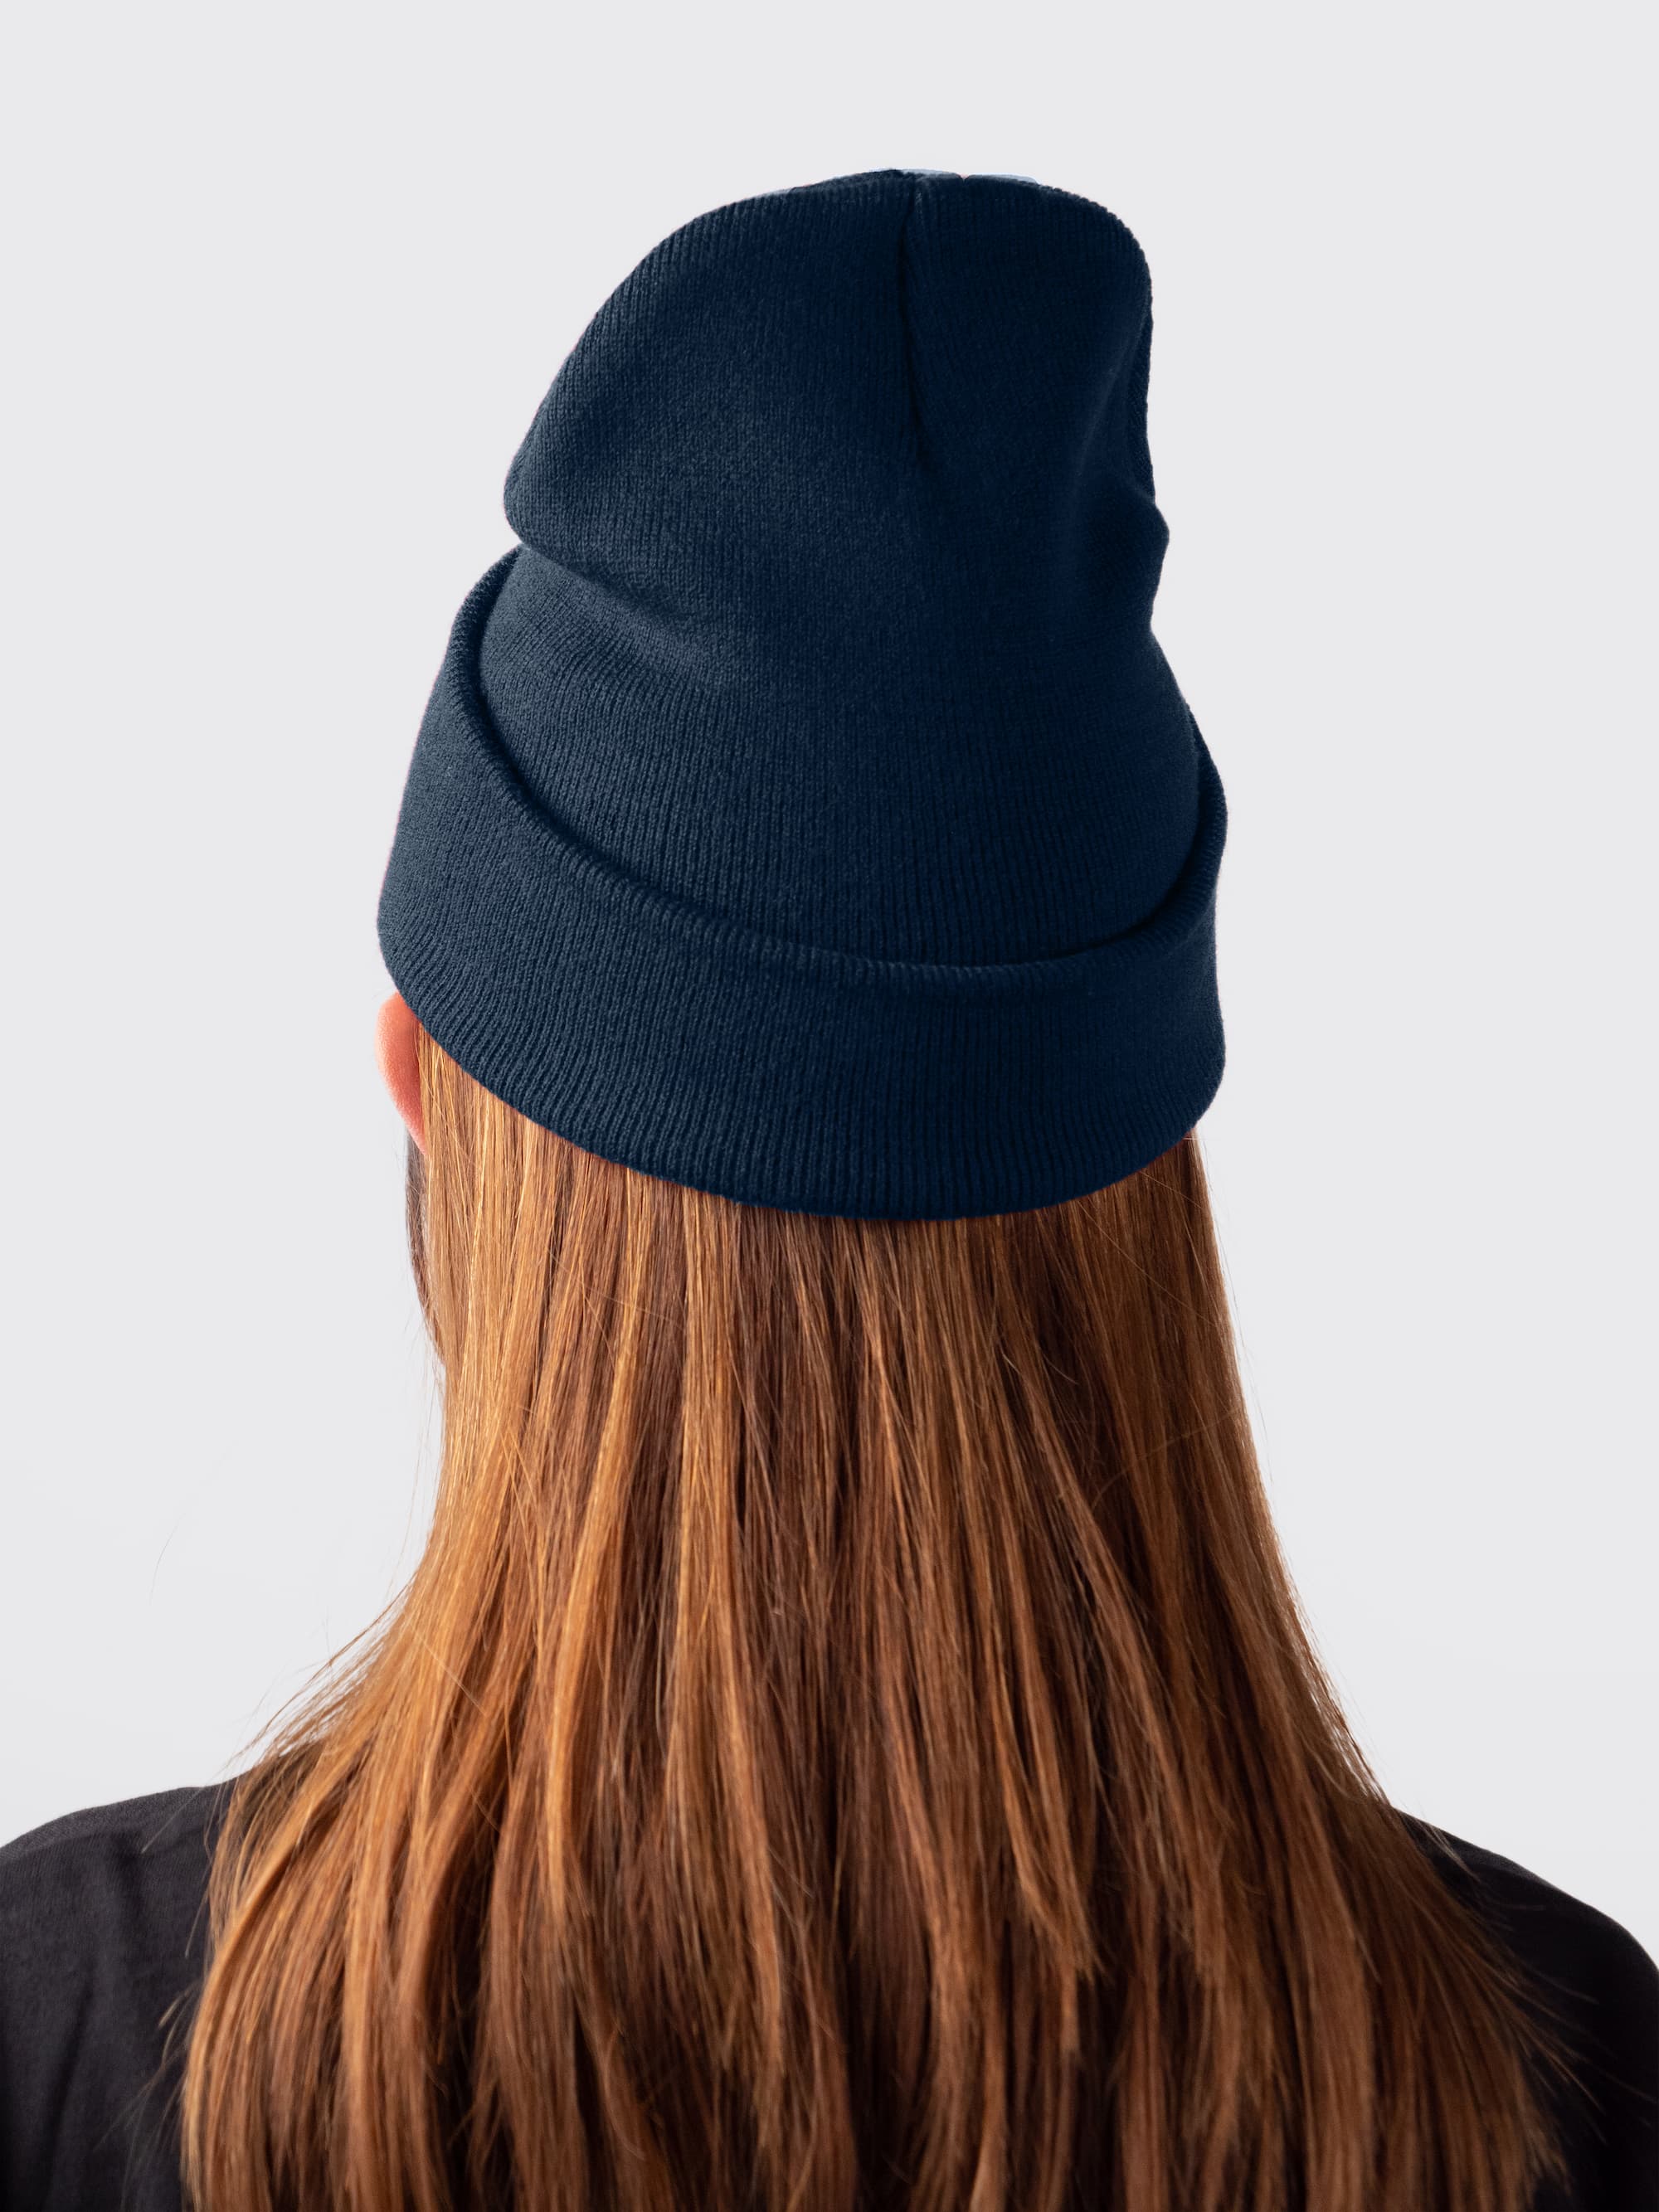 A female student wearing a navy beanie for the winter weather 